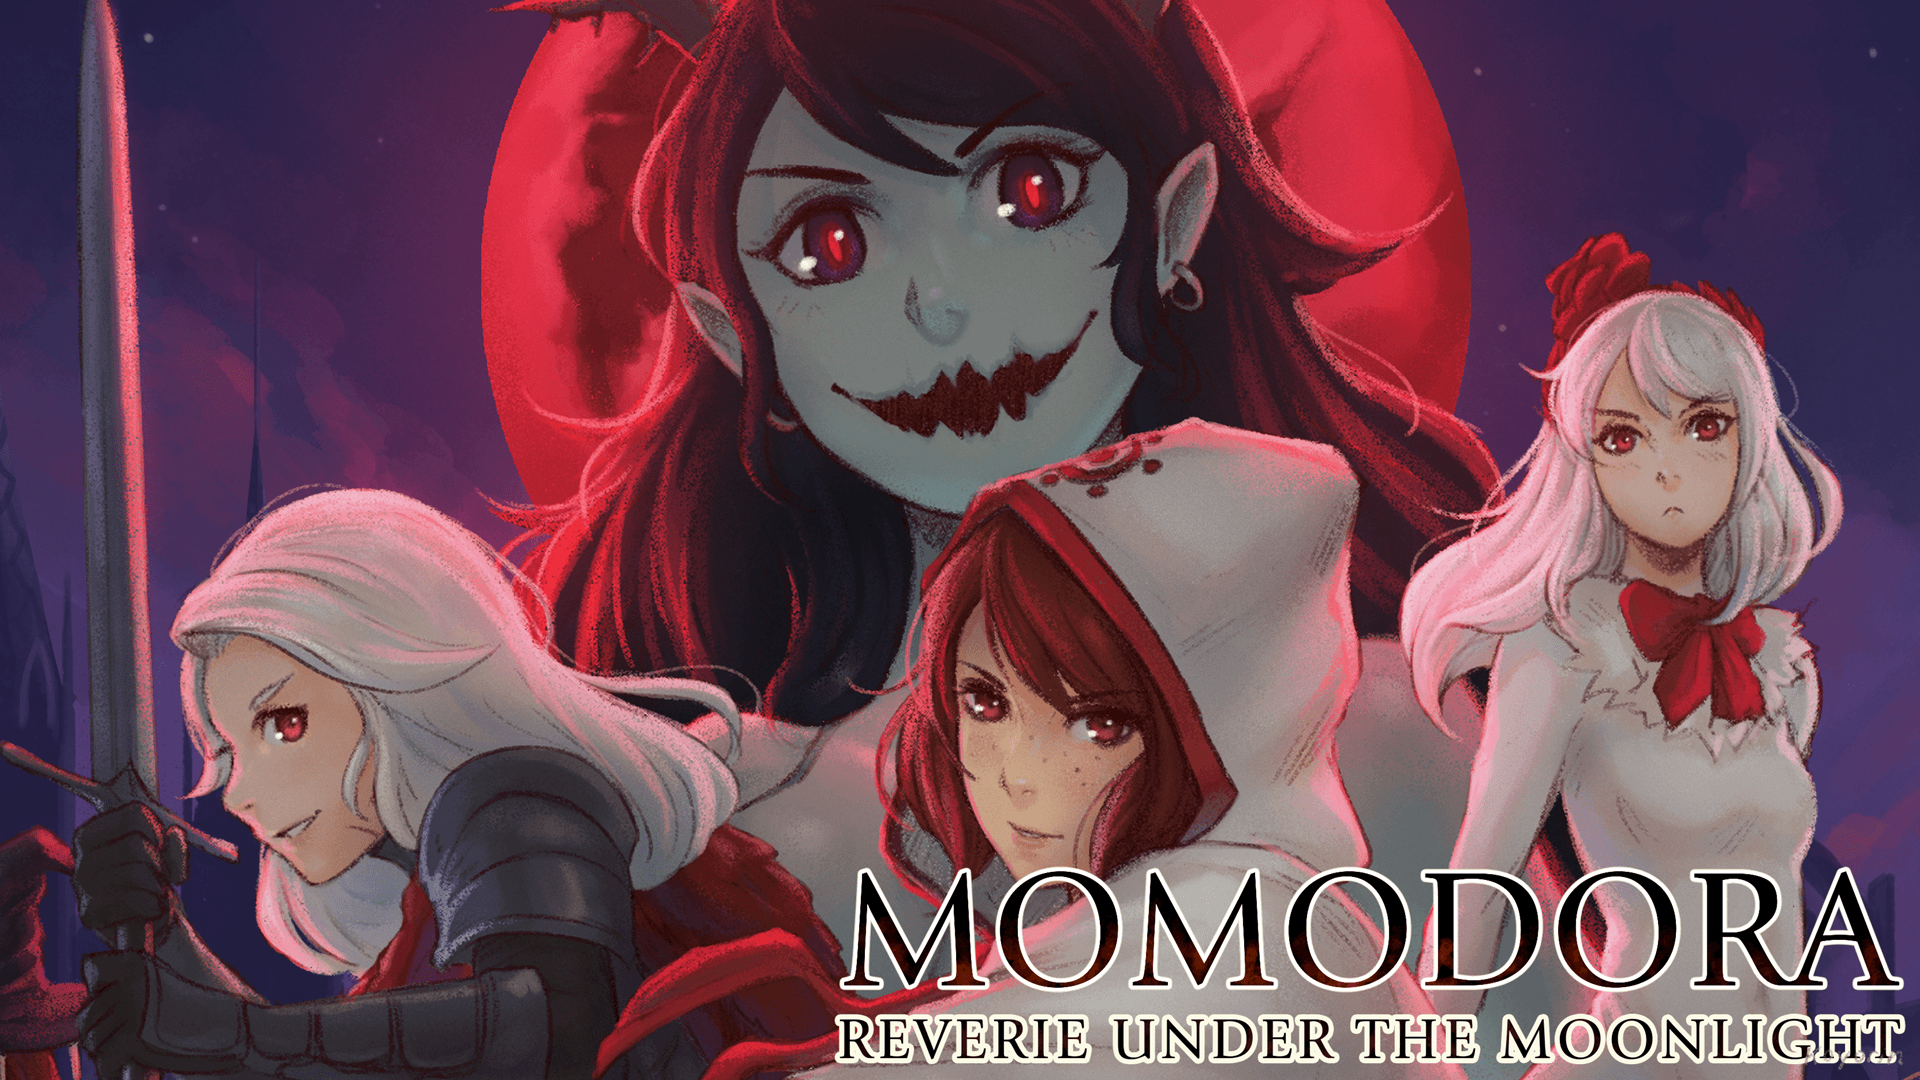 Momodora: Reverie Under the Moonlight Arriving Soon on Xbox One